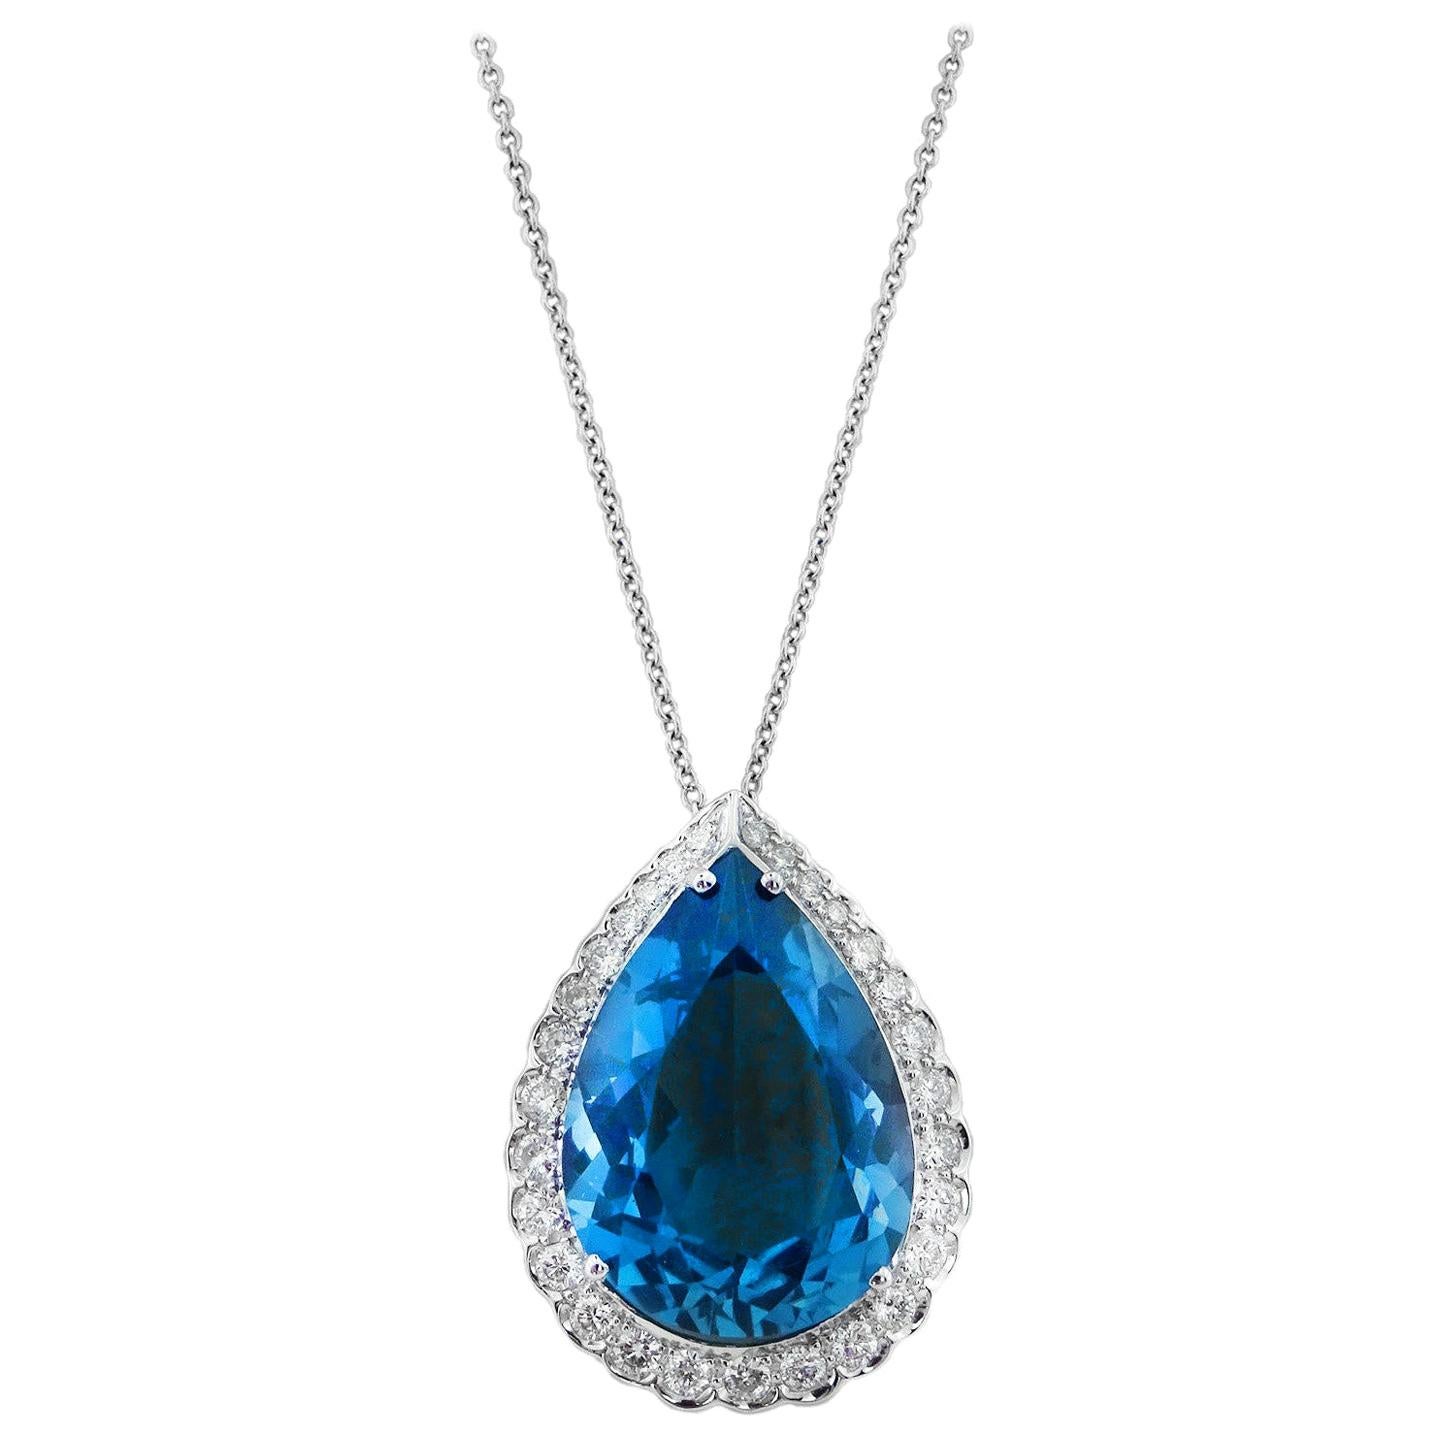 White Gold Pear Cut Blue Topaz Necklace with Diamonds, 11.64 Carat For Sale